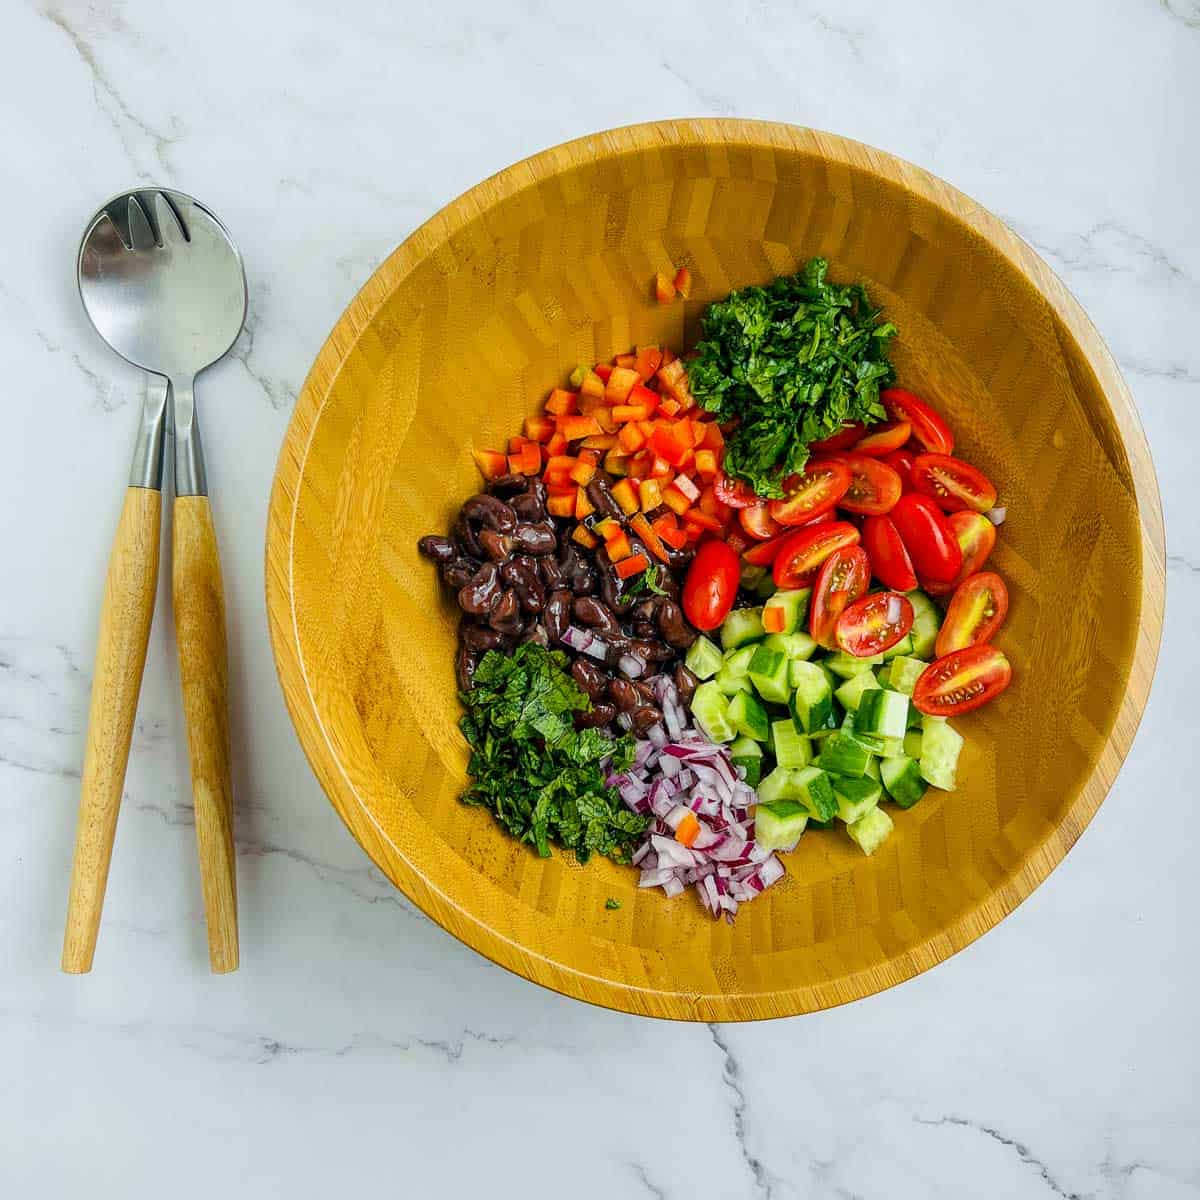 Veggies and beans in a mixing bowl.